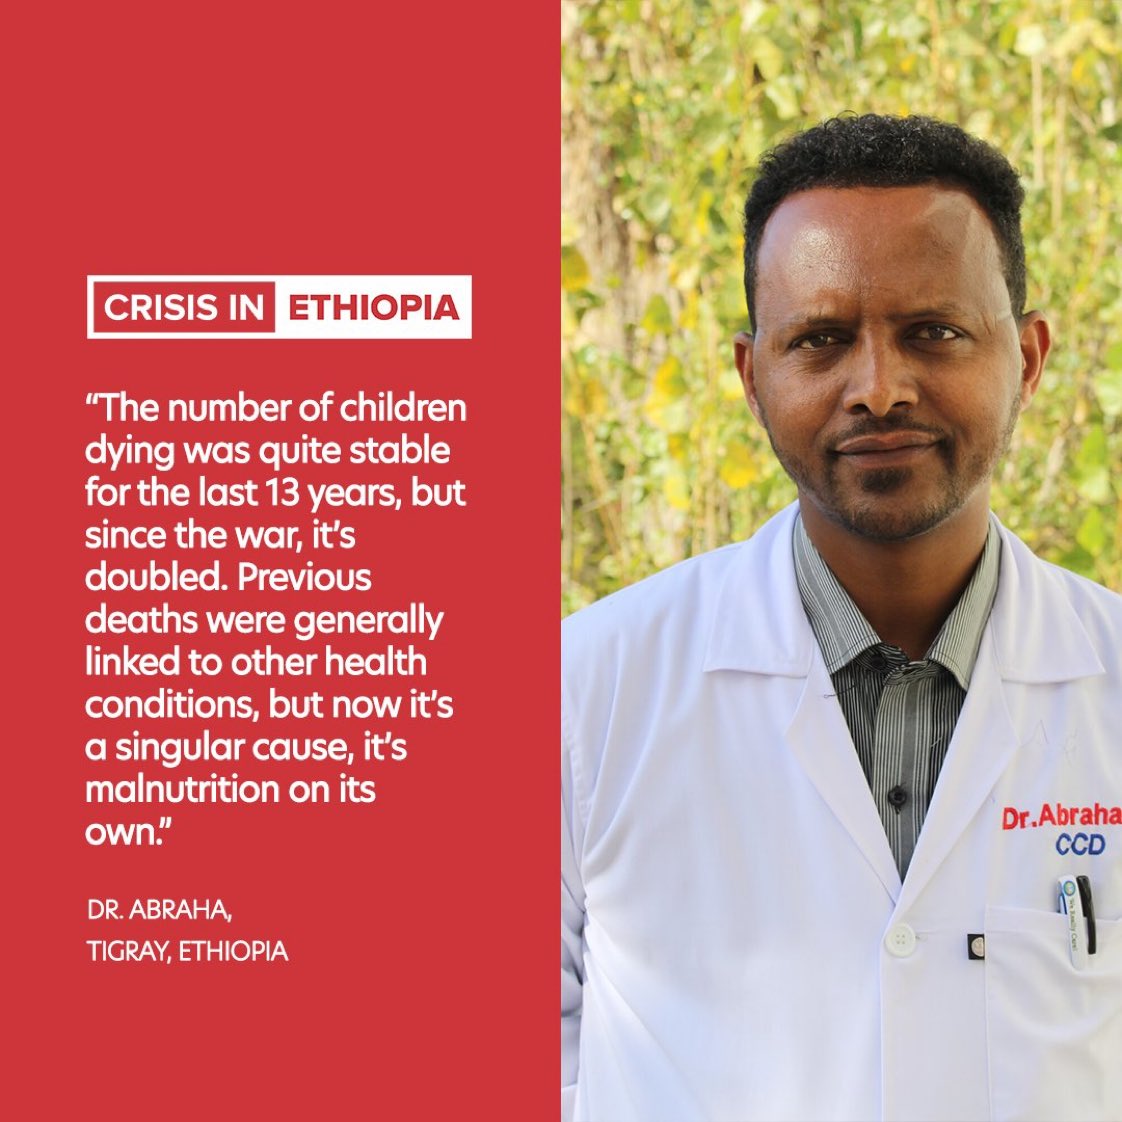 Doctor #Abraha says: “We are seeing three times as many cases of malnutrition as normal, and the mortality rate is five times higher. 
Dear world @IMFNews @WHOEthiopia @ICRC_Africa @HlafitT DrTedros seek to #ResumeAid4Tigray to #SaveTigrayChildren
marysmeals.org/news/articles/…